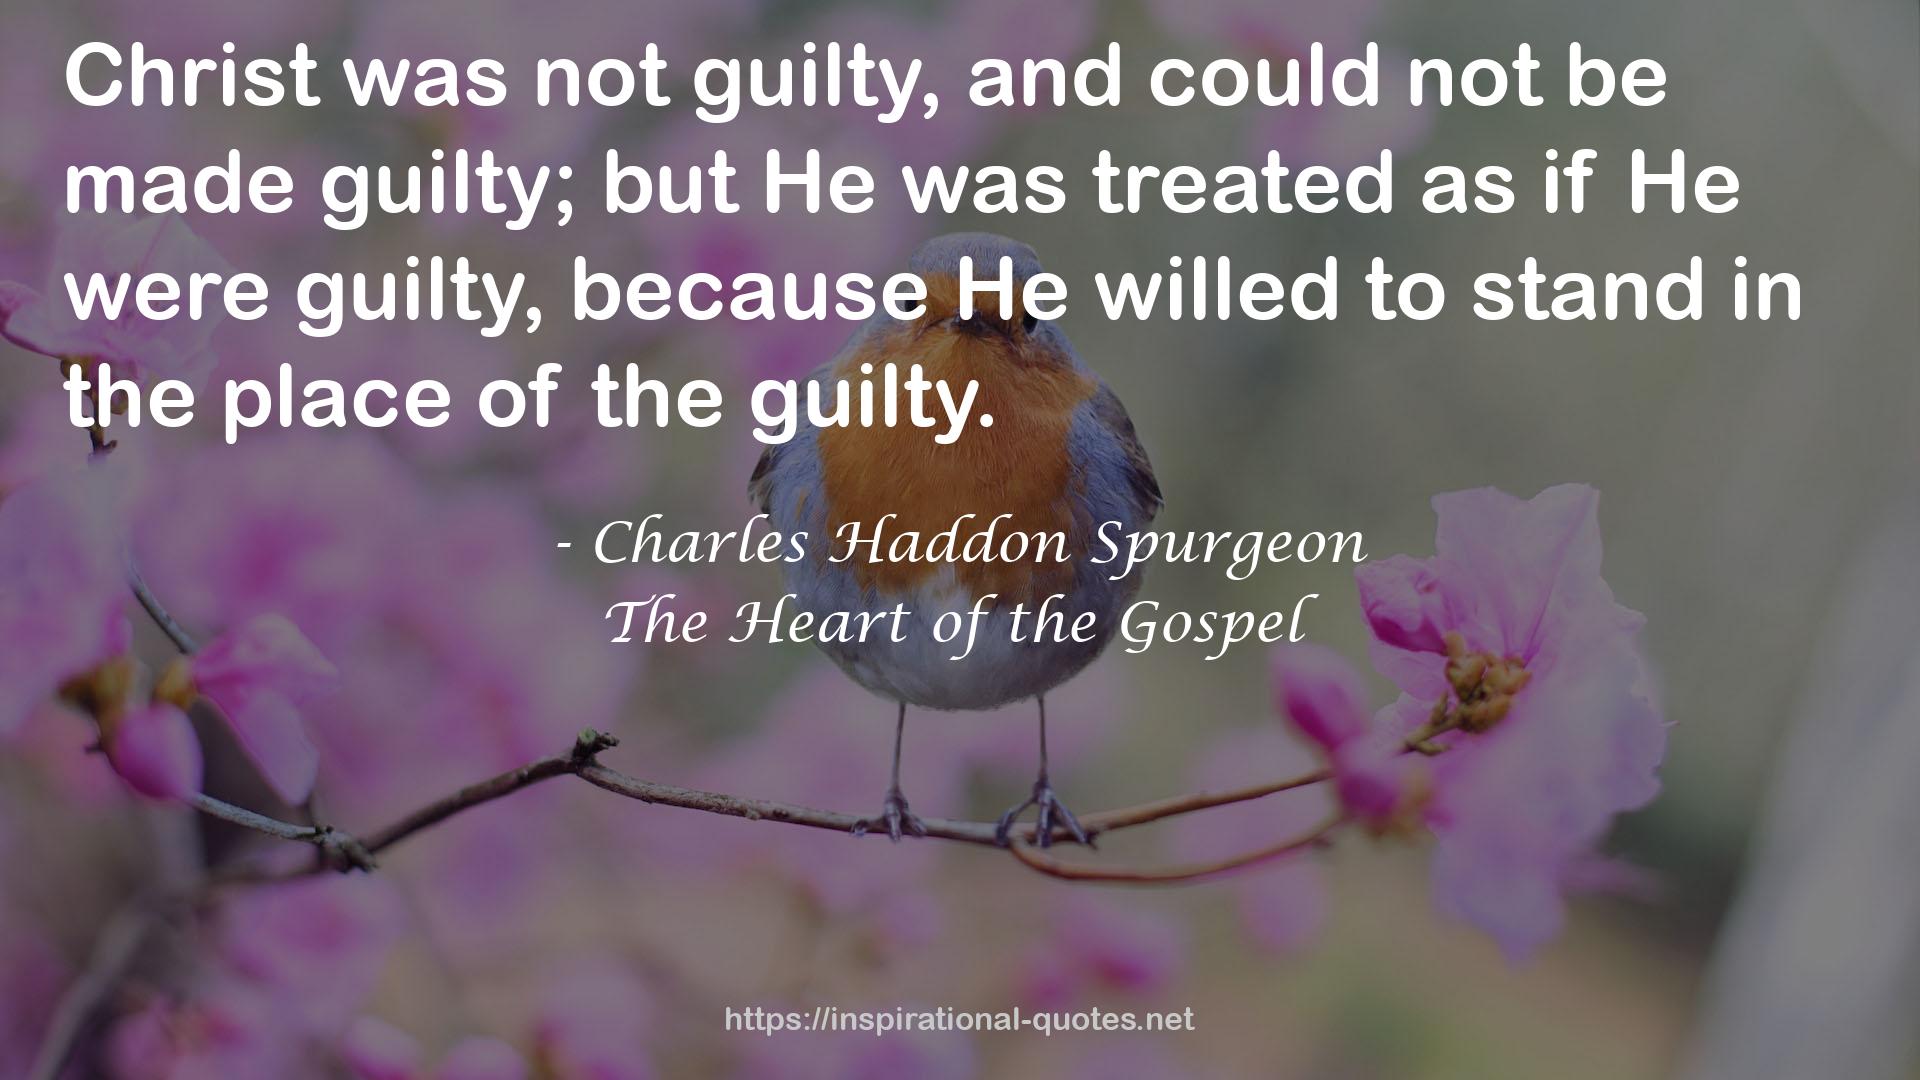 The Heart of the Gospel QUOTES